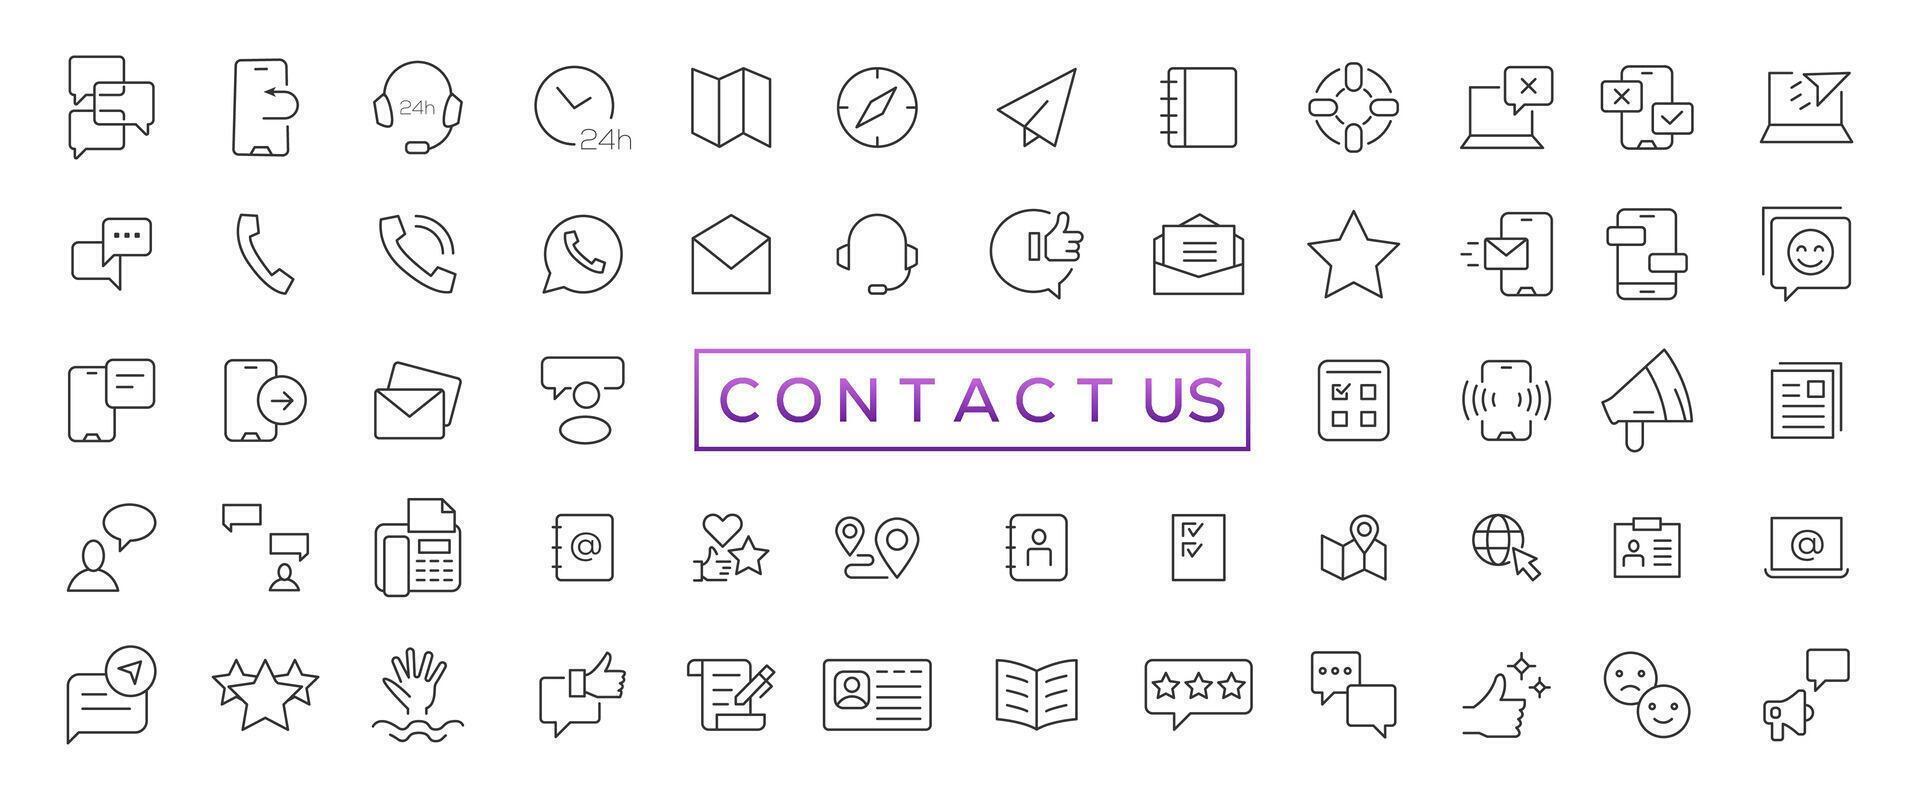 Set of simple Contact us icons for web and mobile app. Social Media network icon call us email mobile signs. Customer service. Contact support sign and symbols vector